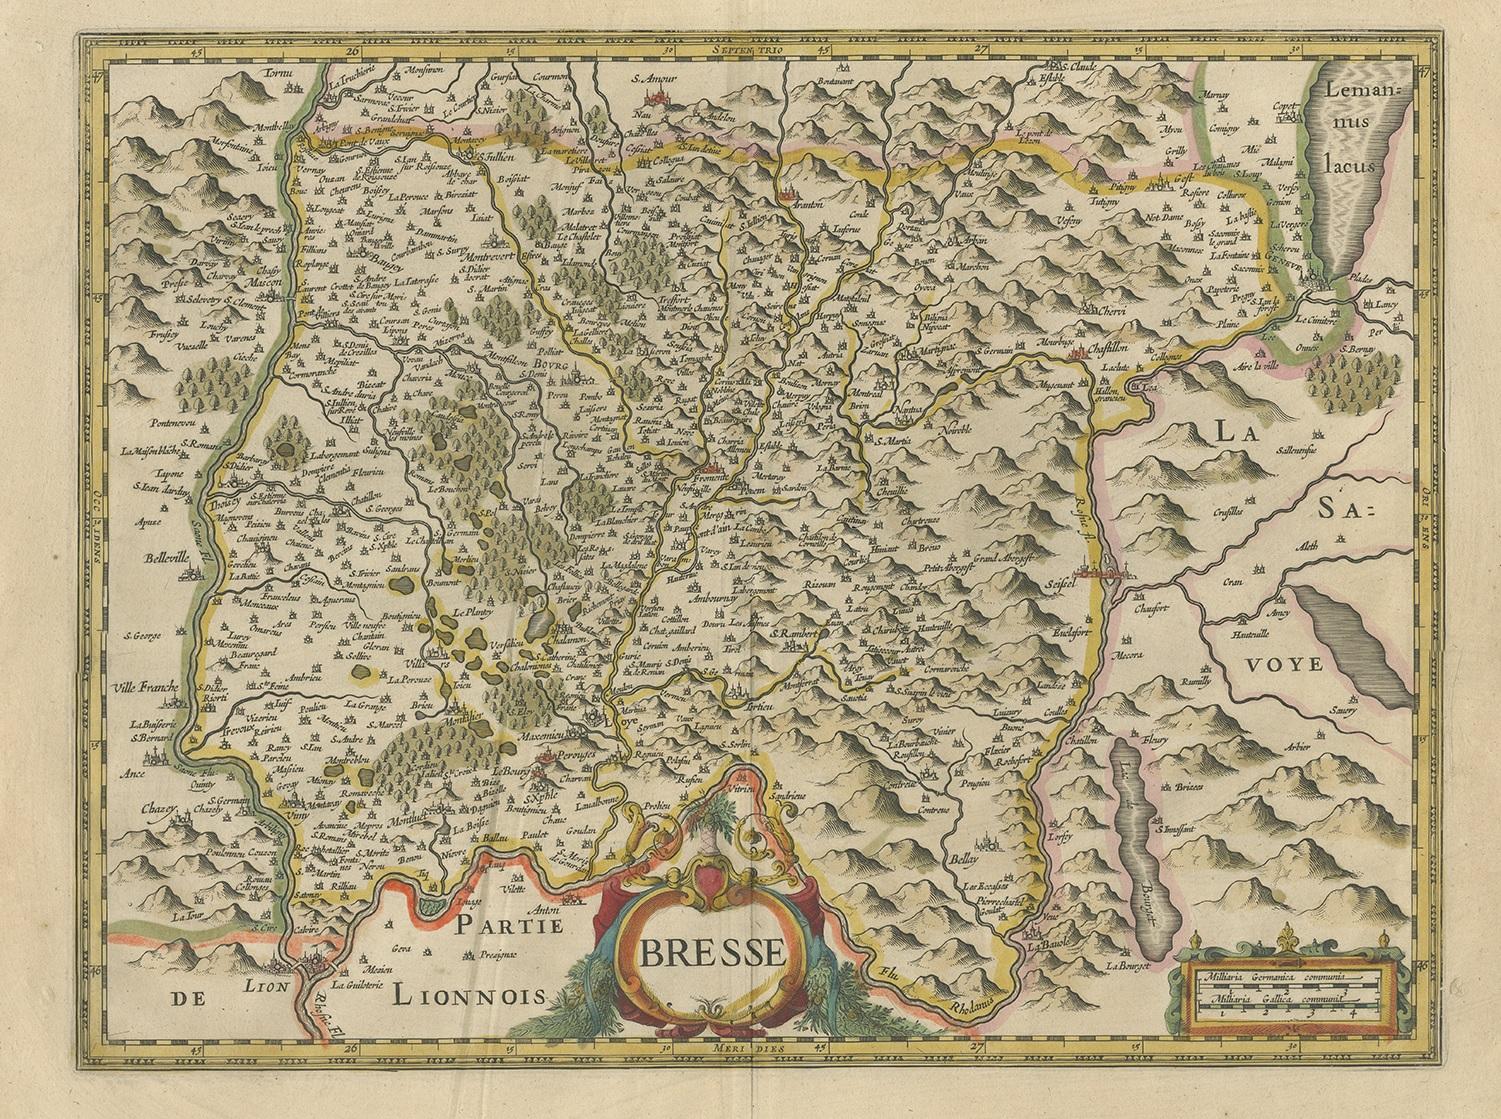 Antique map titled 'Bresse'. Old map of the former region of Bresse, France. It is located in the regions of Auvergne-Rhône-Alpes and Bourgogne-Franche-Comté of eastern France. This map originates from a composite atlas and most likely published by